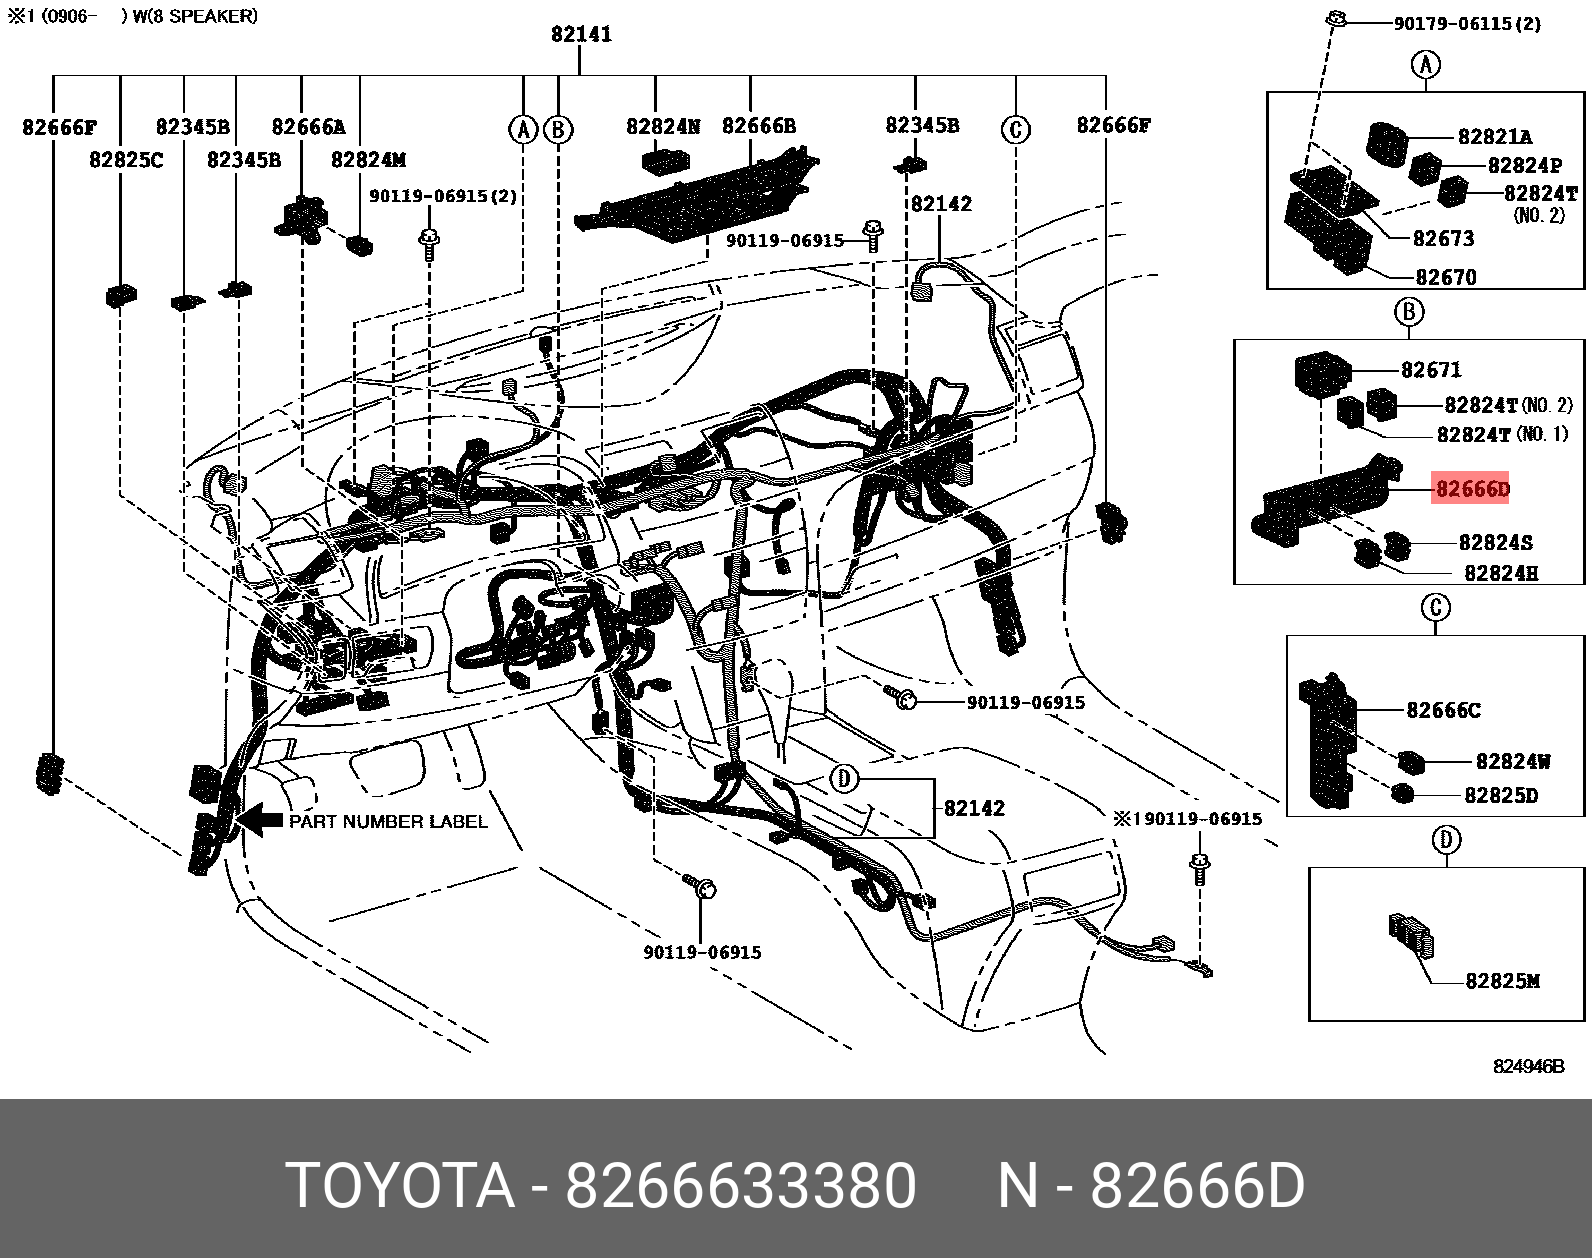 CAMRY 200601 - 201108, HOLDER, CONNECTOR NO.5